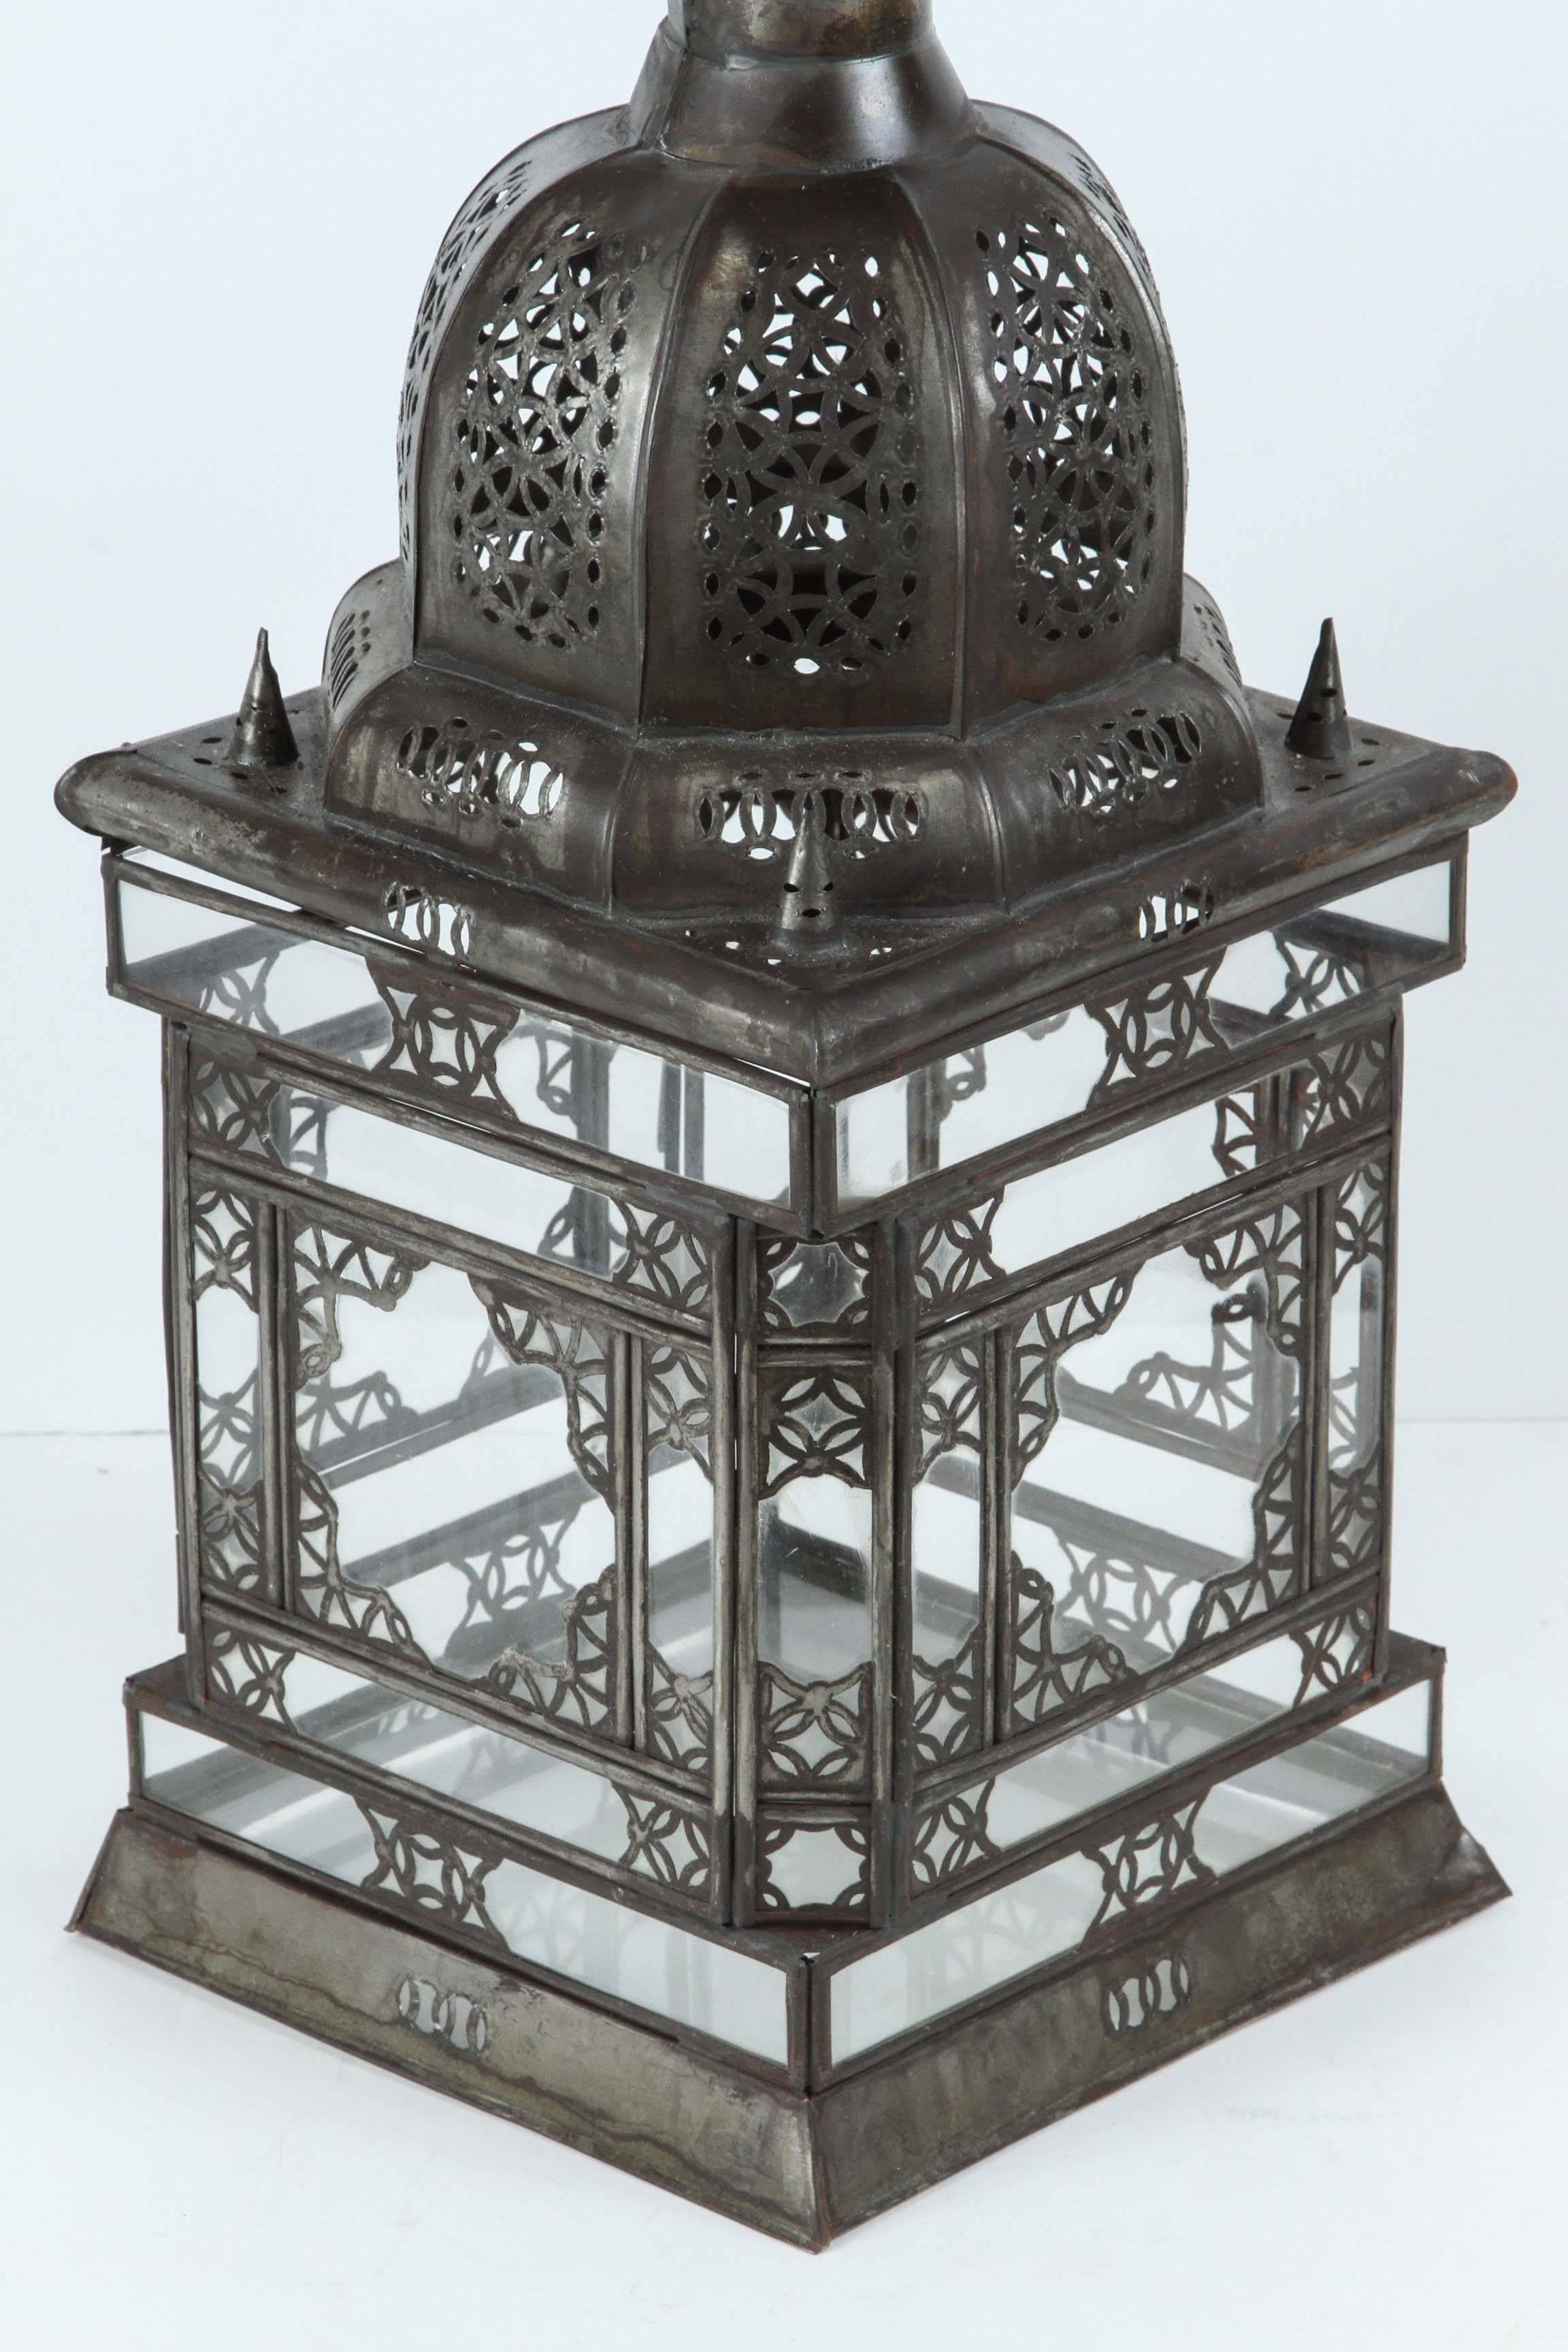 Moroccan Moorish clear glass candle lantern with filigree designs, handcrafted in Morocco. Rust patina color finish.
Hurricane candle lamp with clear glass bottom, great to use as a table lantern or hanging pendant or wall sconce.
The lantern has a